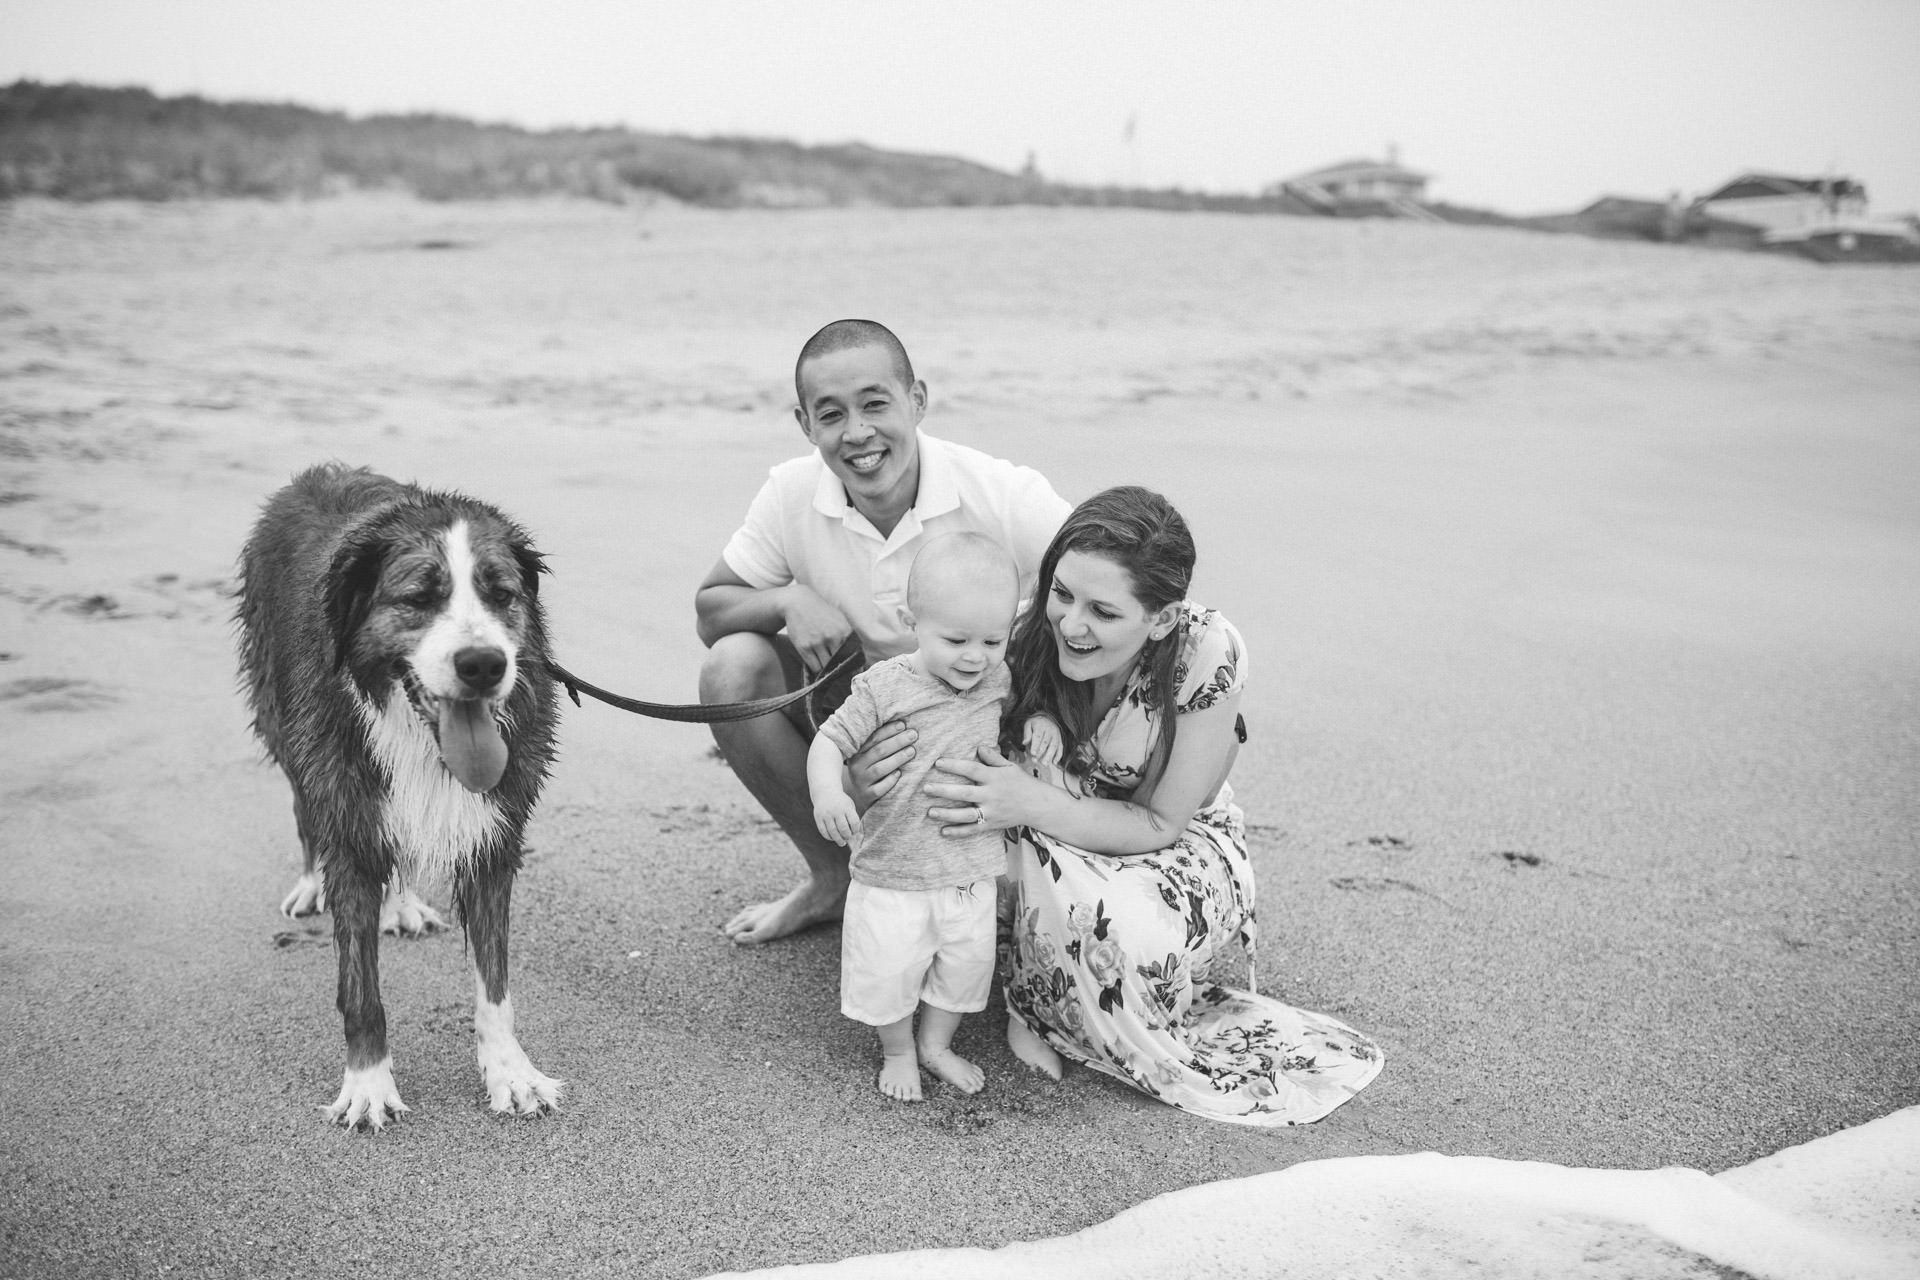 Shannon O'Neil with her husband, son, and dog on an Outer Banks, NC beach